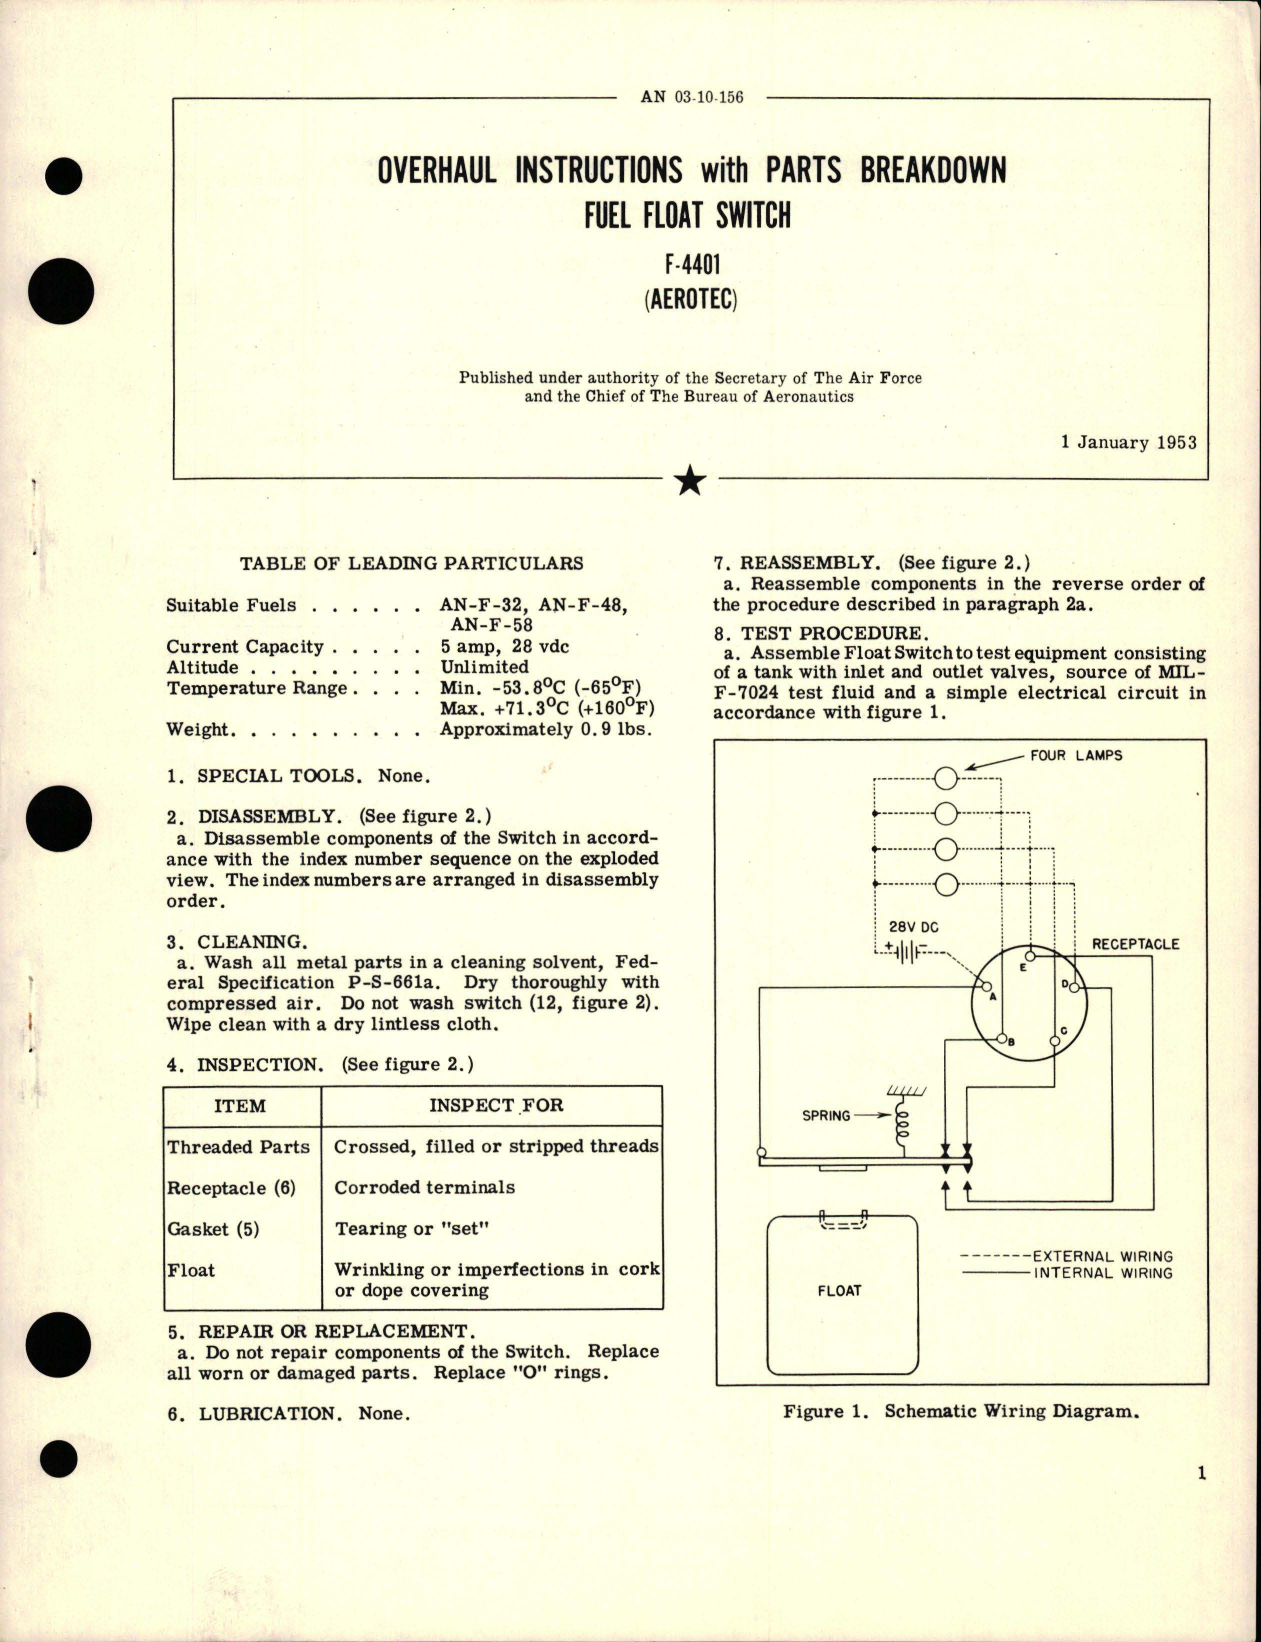 Sample page 1 from AirCorps Library document: Overhaul Instructions with Parts Breakdown for Fuel Float Switch - F-4401